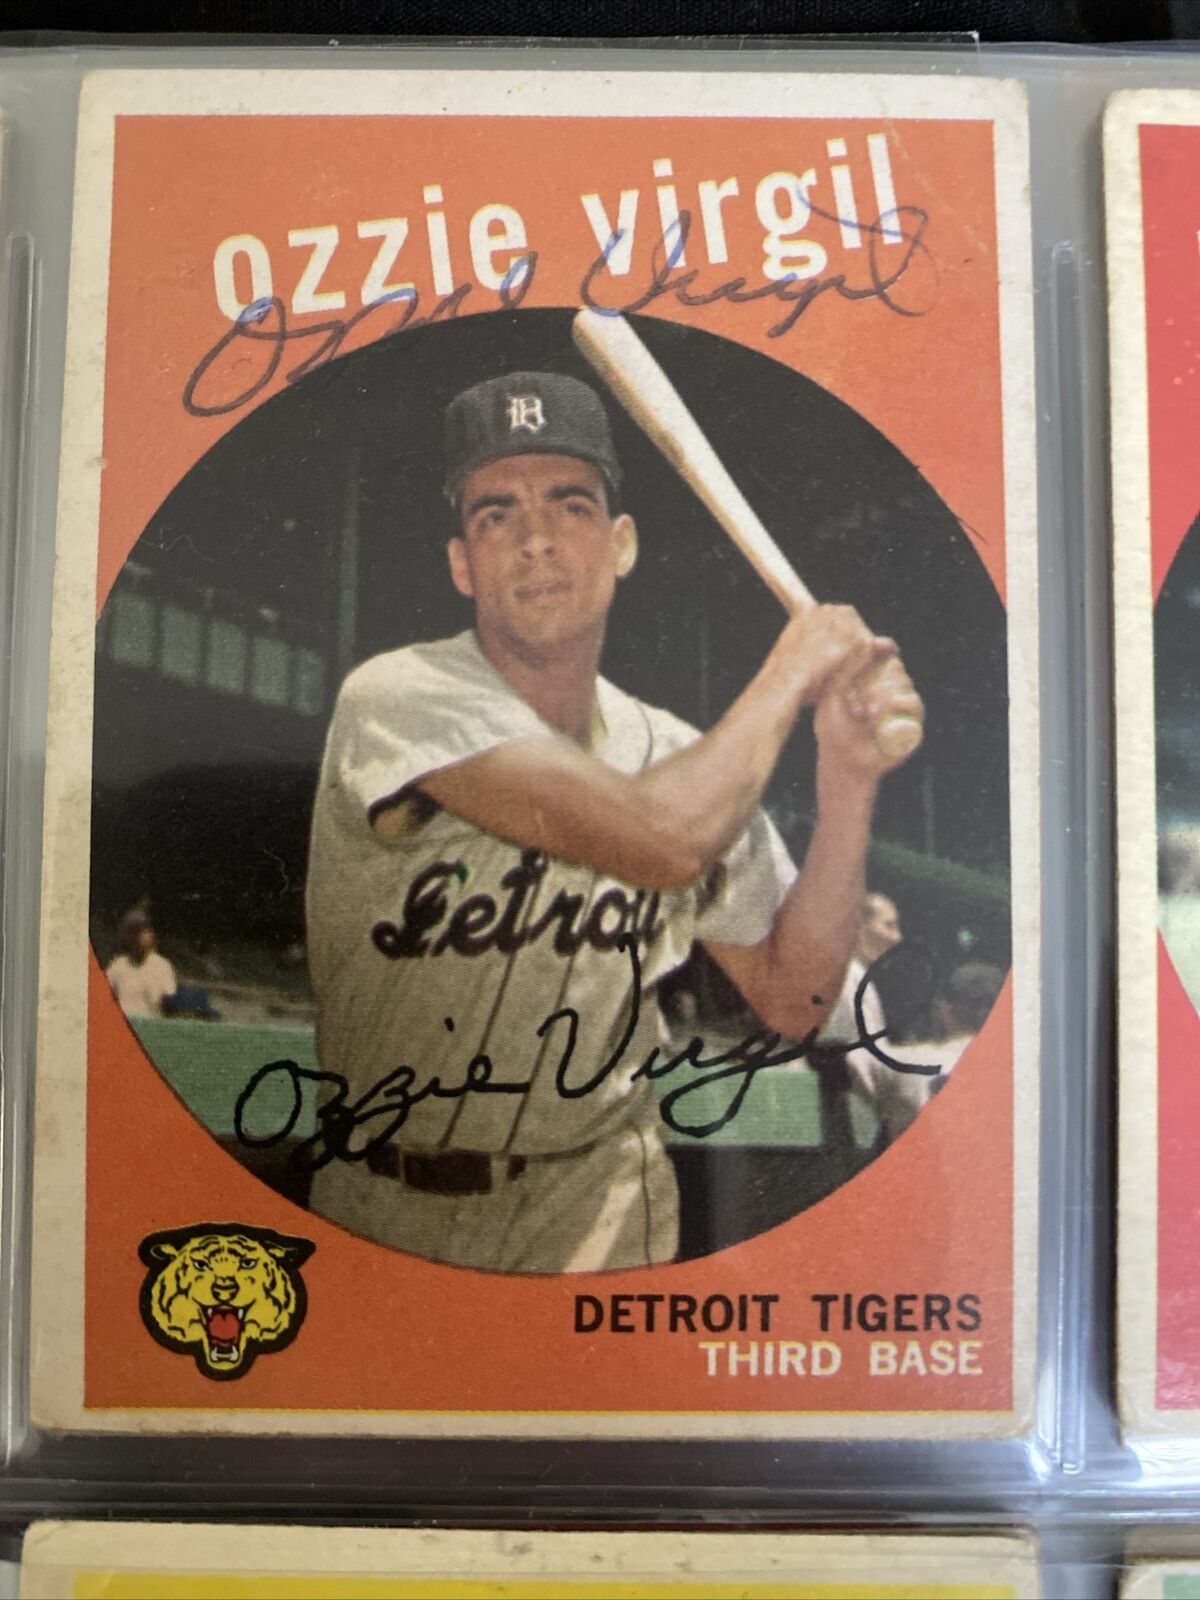 Ozzie Virgil Autographed Hand Signed Card 1959 Topps Detroit Tigers Baseball